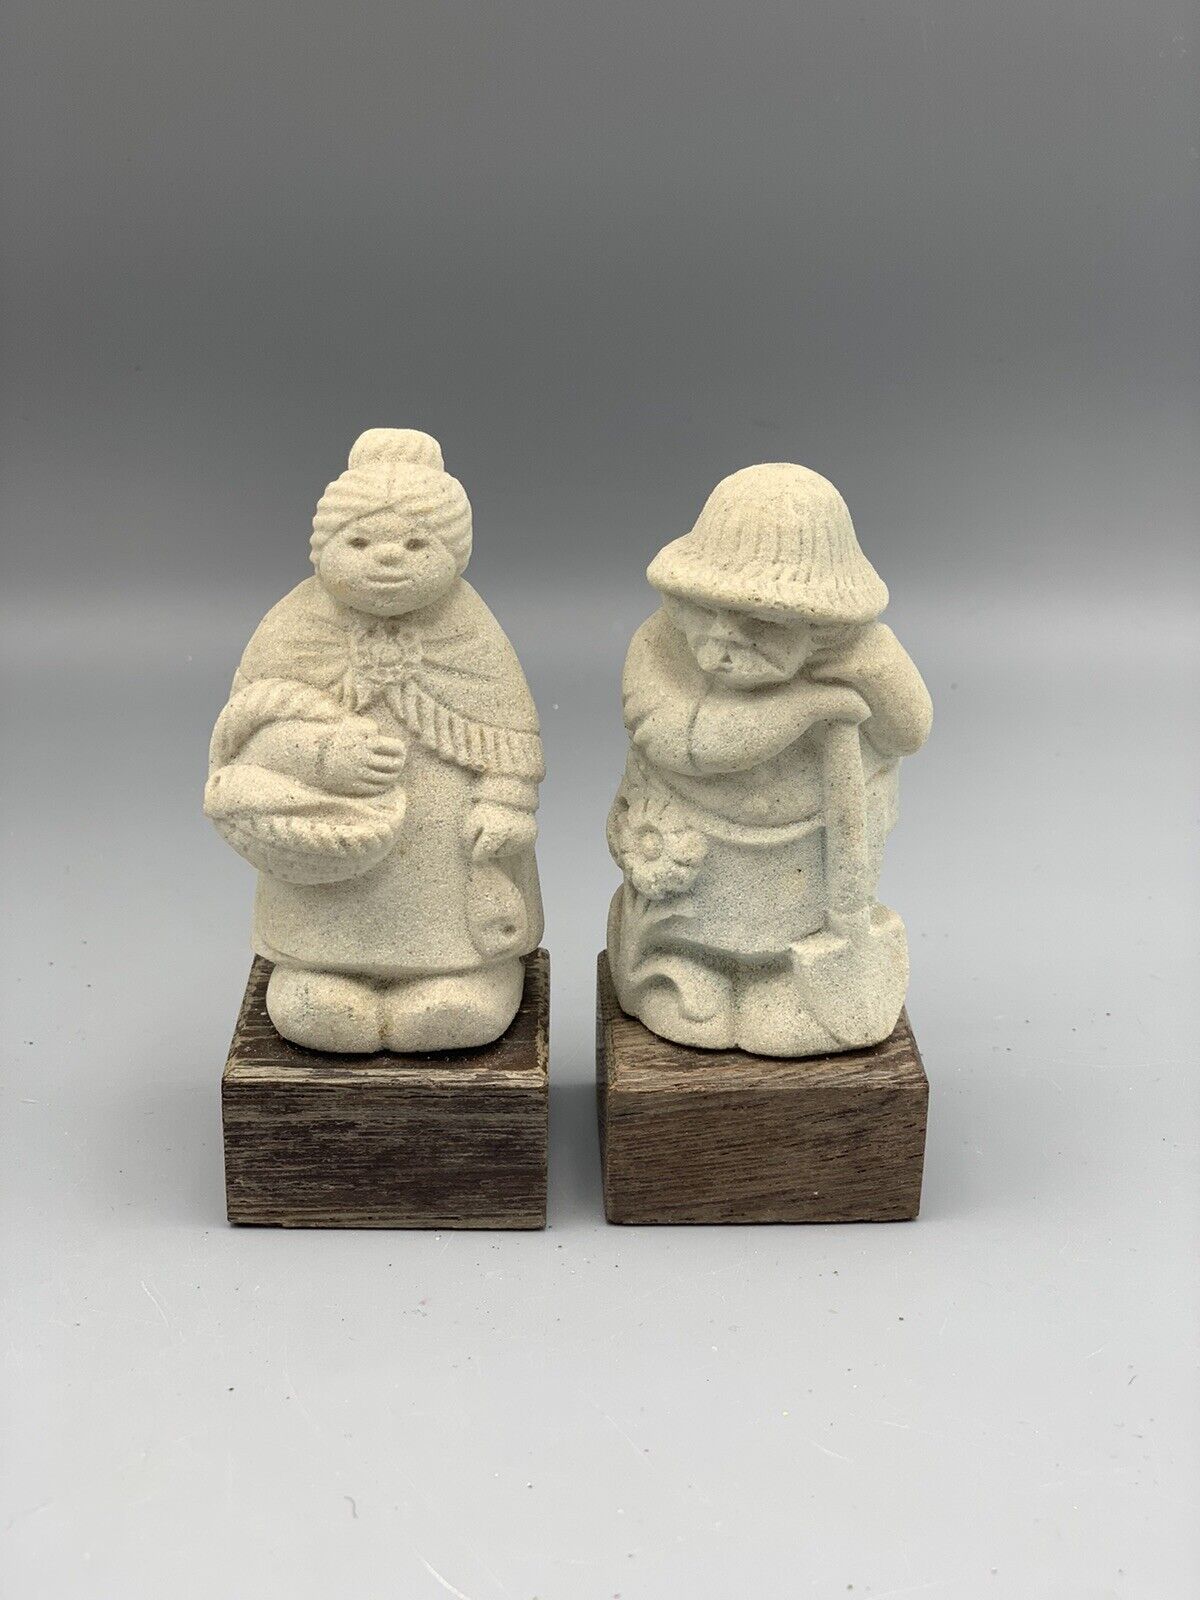 Marbell Stone Art Belgium Rustic Fishing Couple Statuettes Figurine Matched Pair